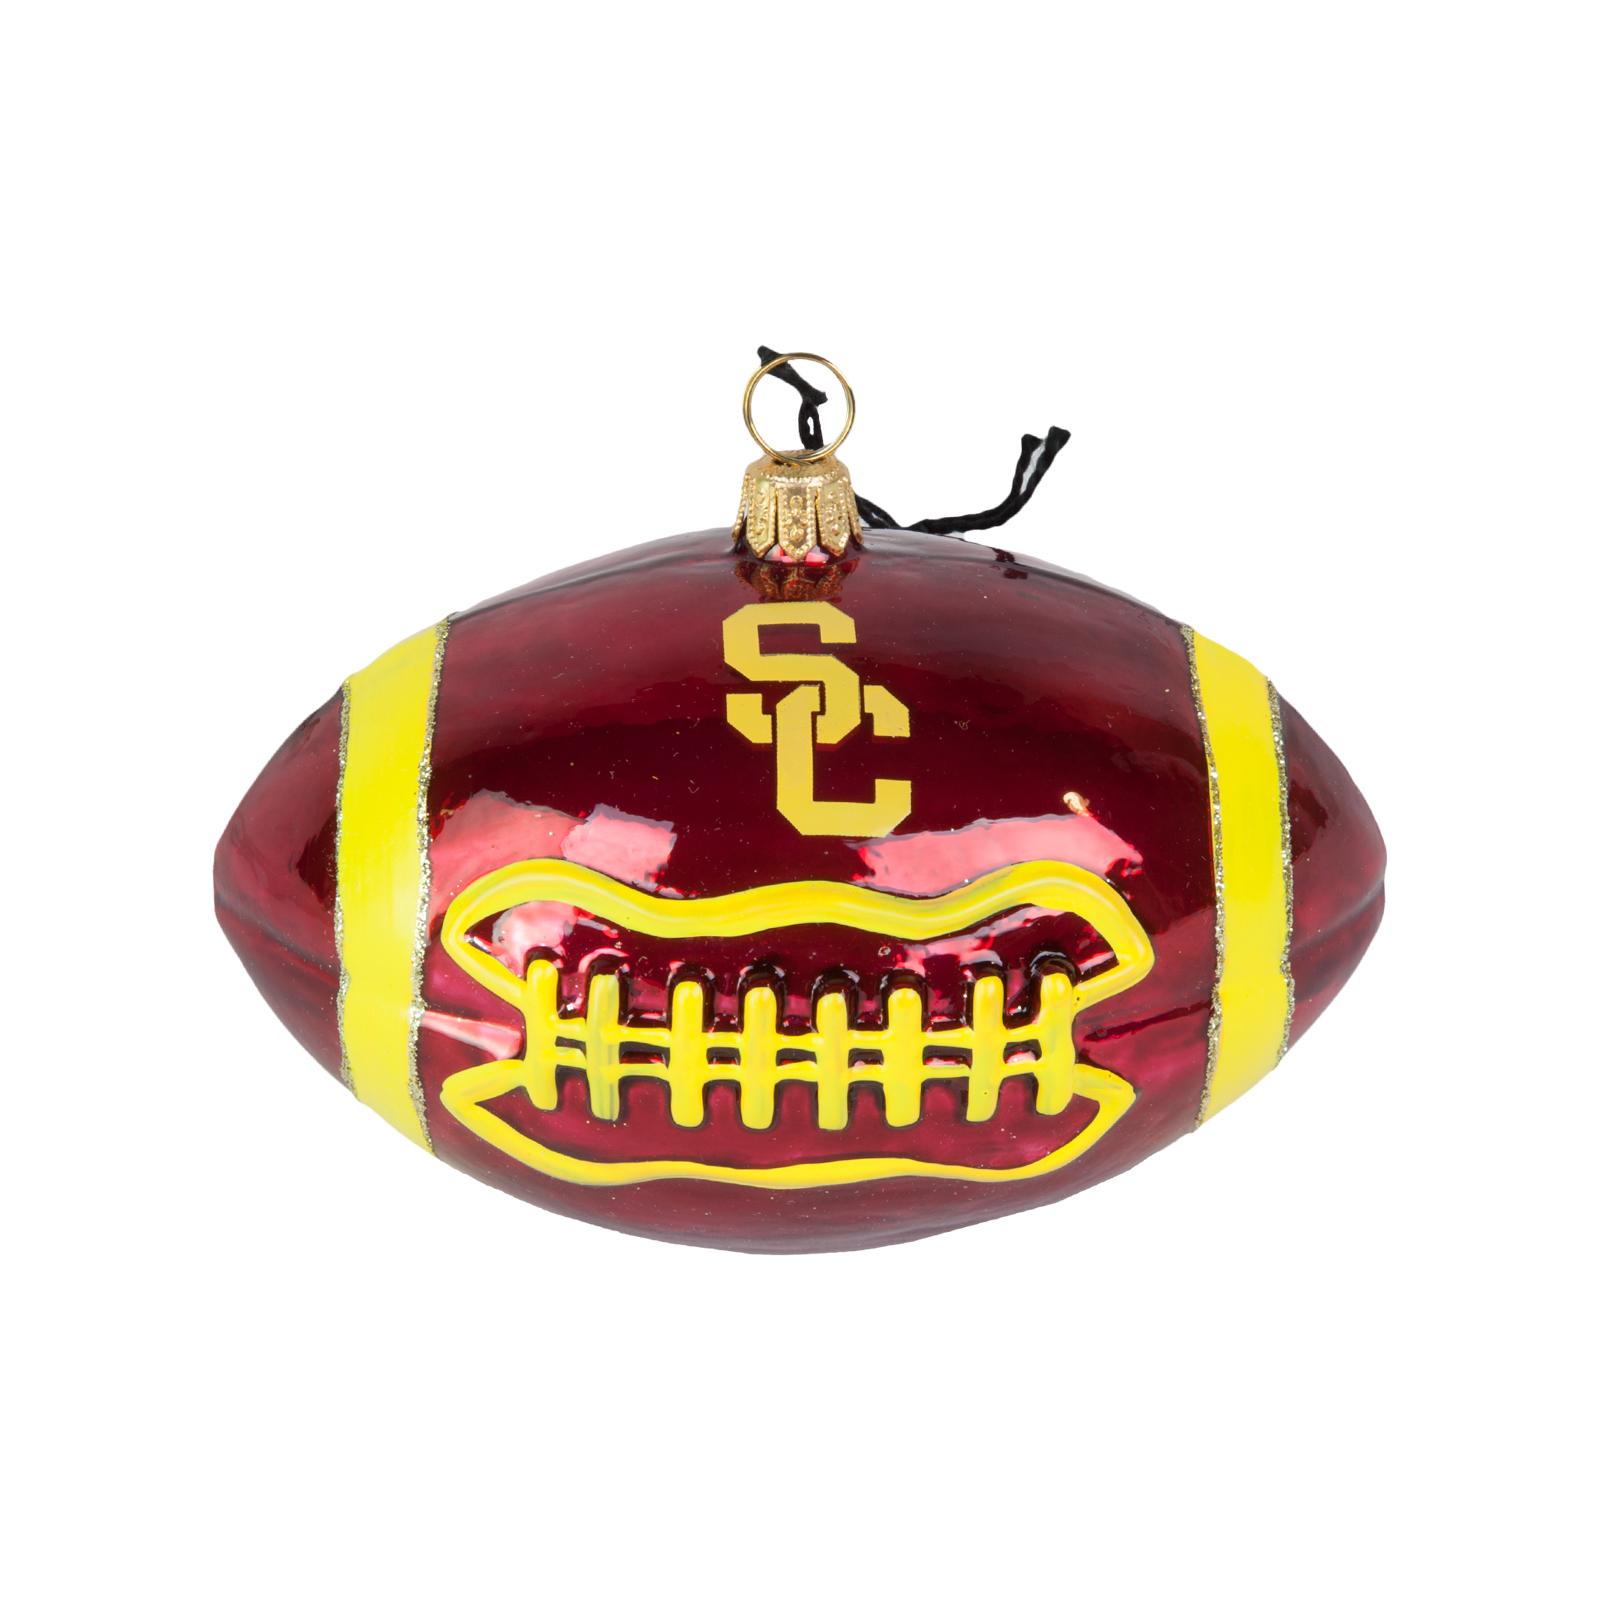 USC FOOTBALL ORNAMENT BY JOY TO THE WORLD image01